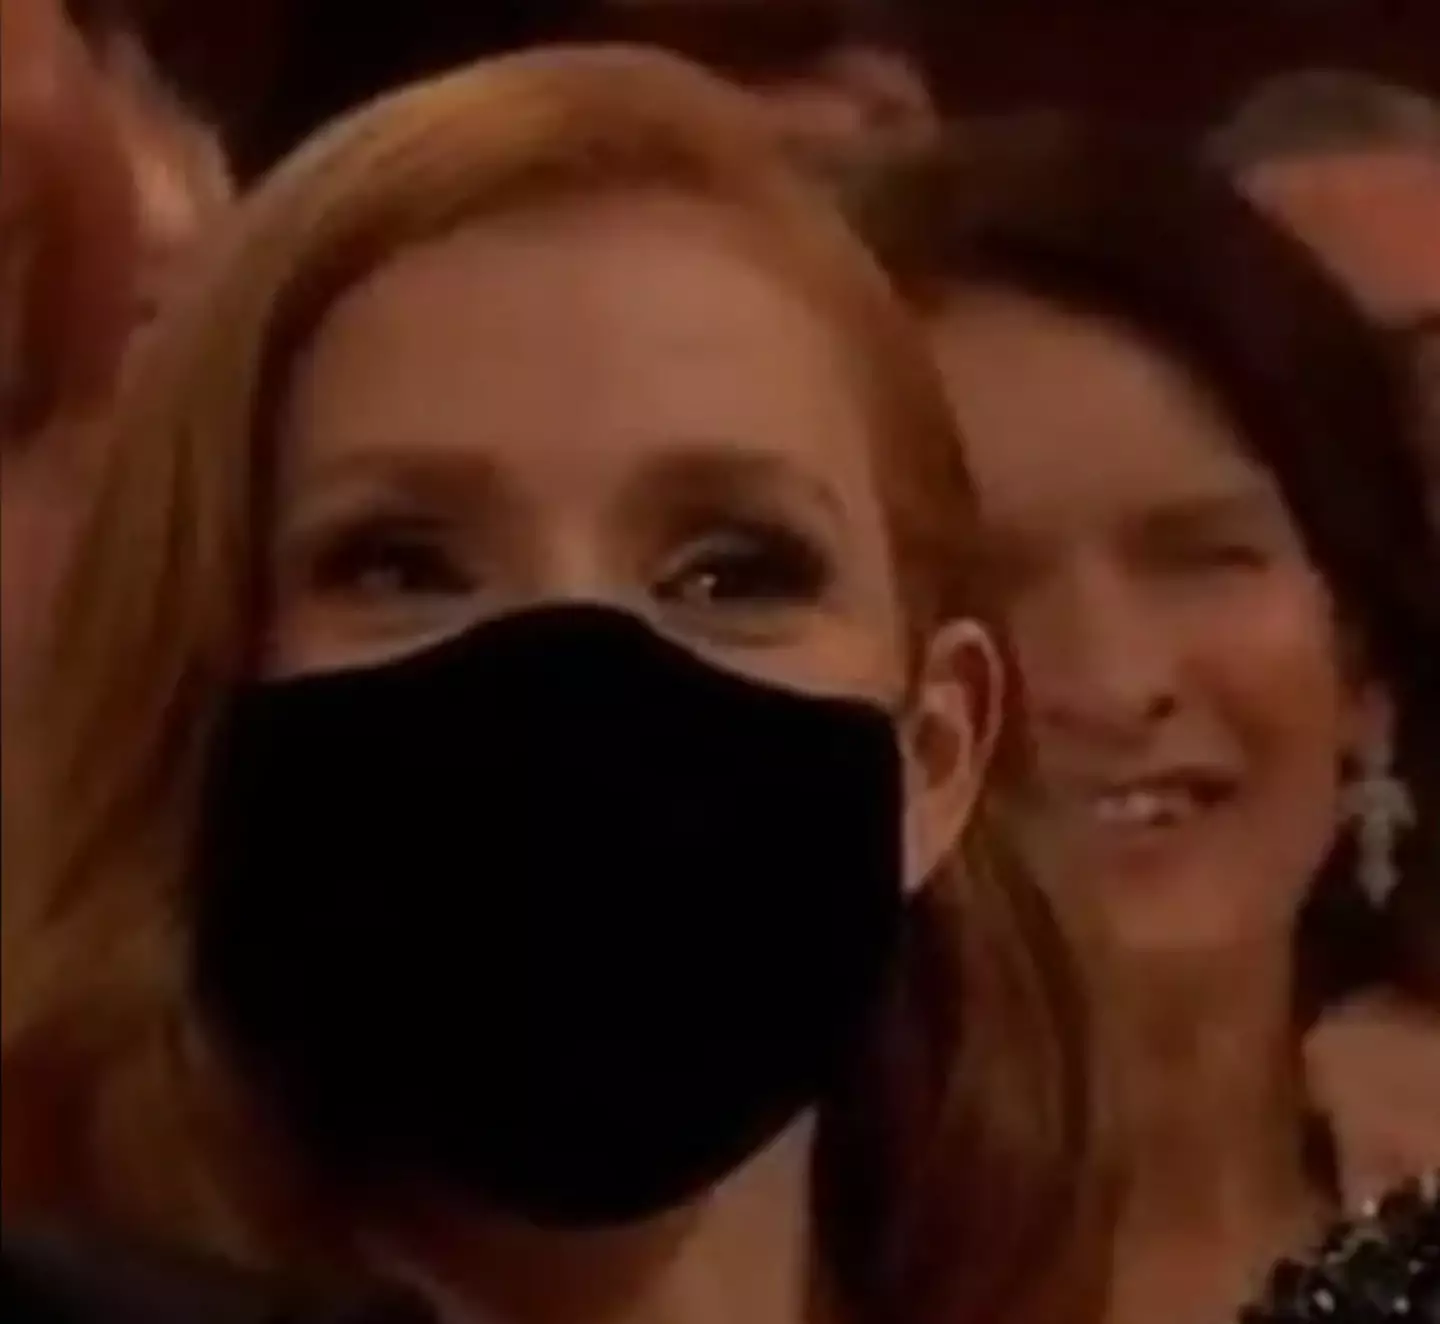 Jessica Chastain was spotted wearing a mask.